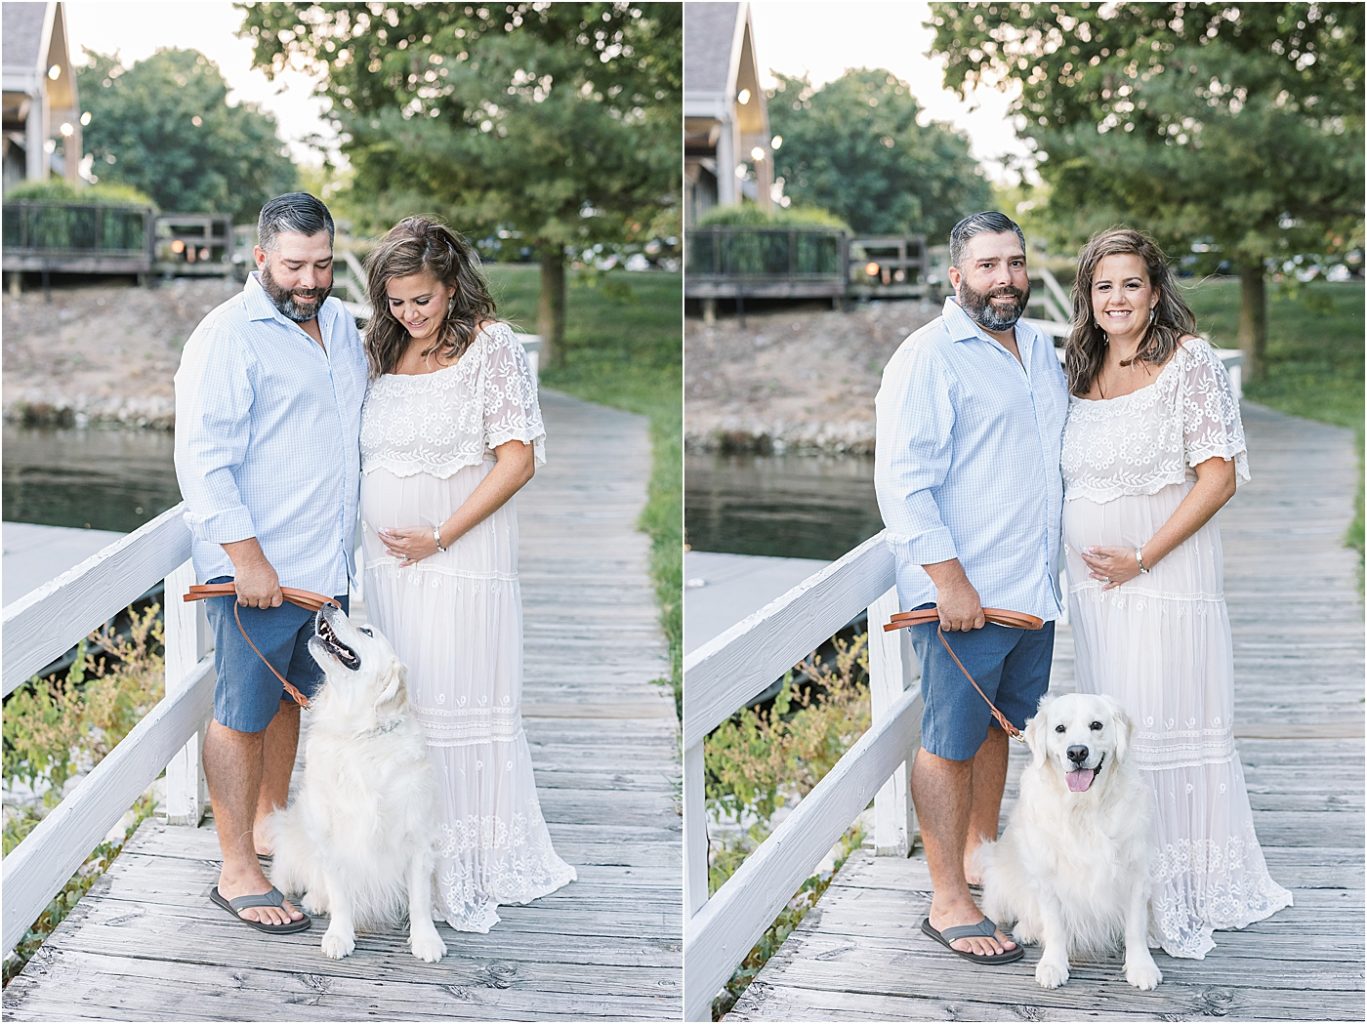 Expecting parents with family dog at maternity session | Lindsay Konopa Photography